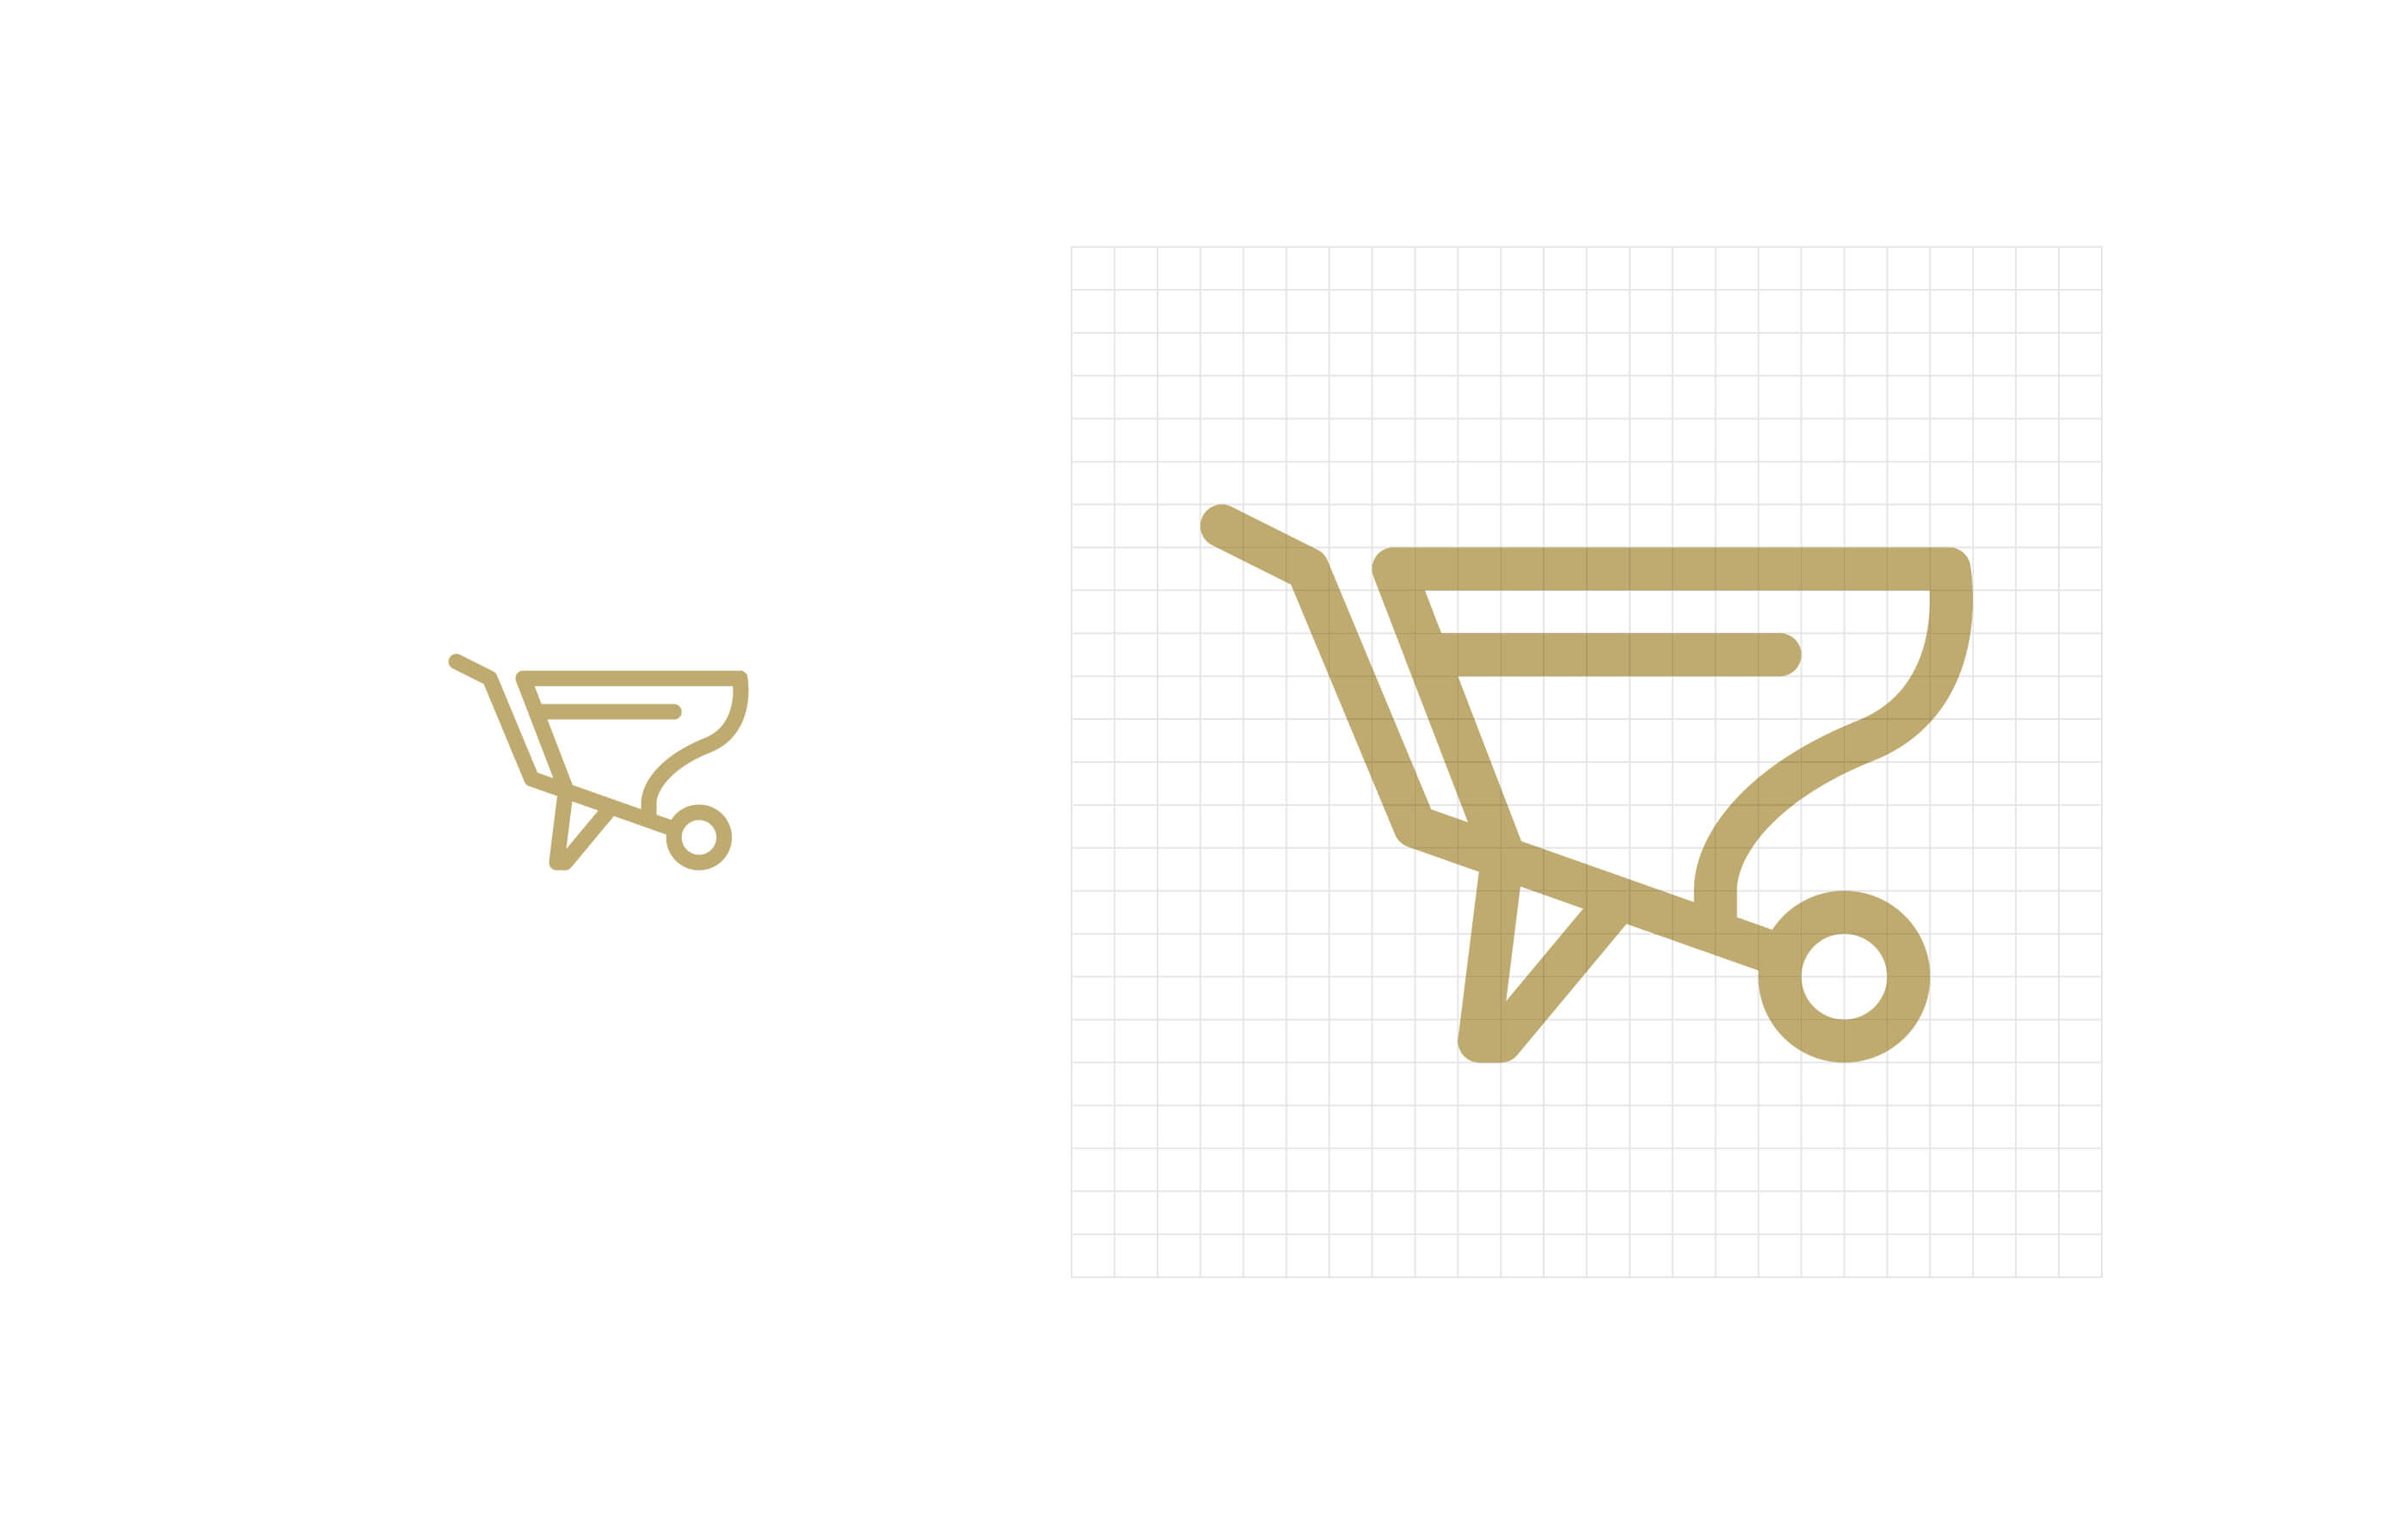 Iconography construction on a 24 x 24px grid, showing a gold line icon of a wheelbarrow on a white background